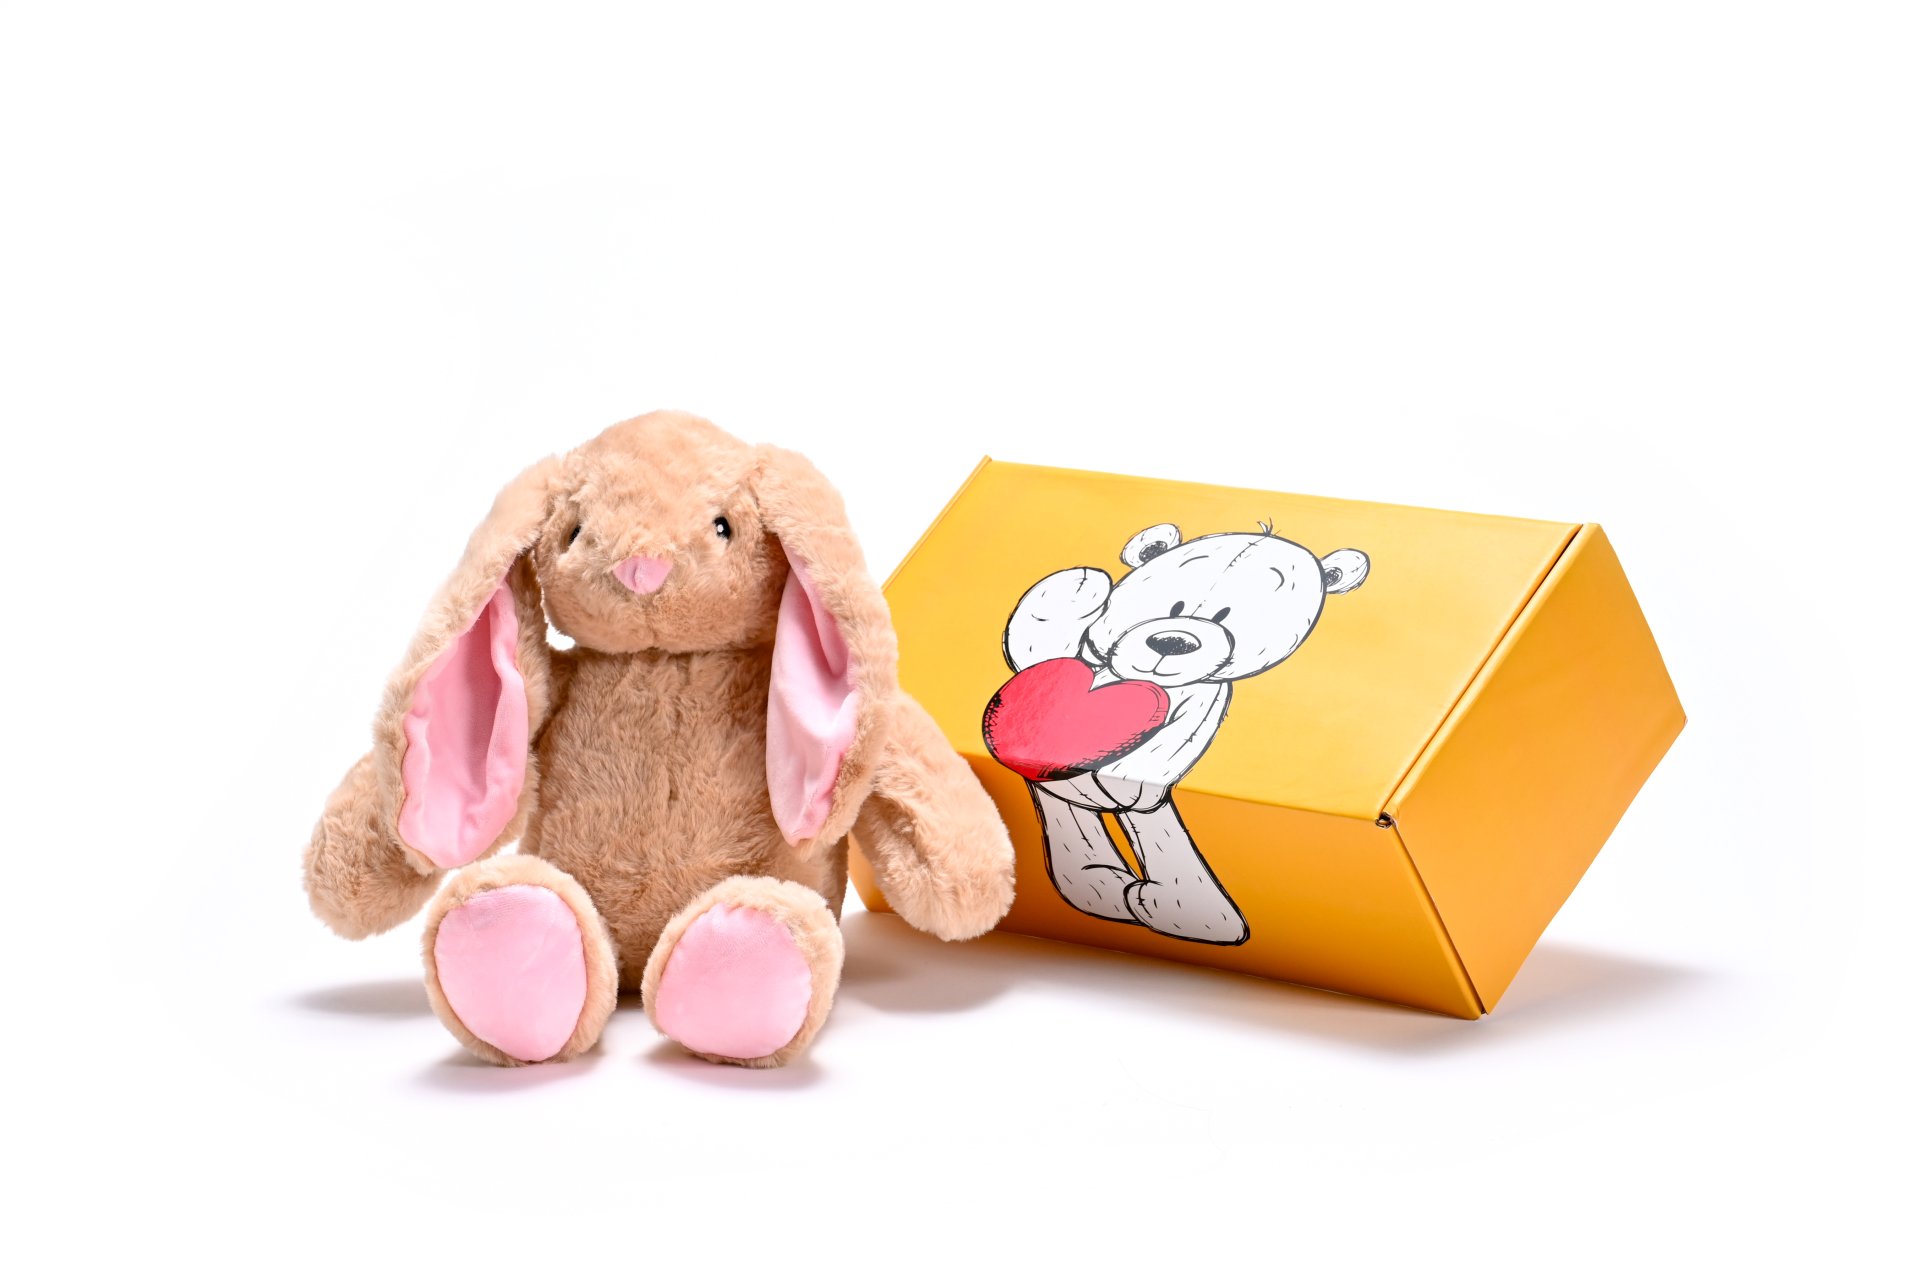 a stuffed brown bunny soft toy next to a box